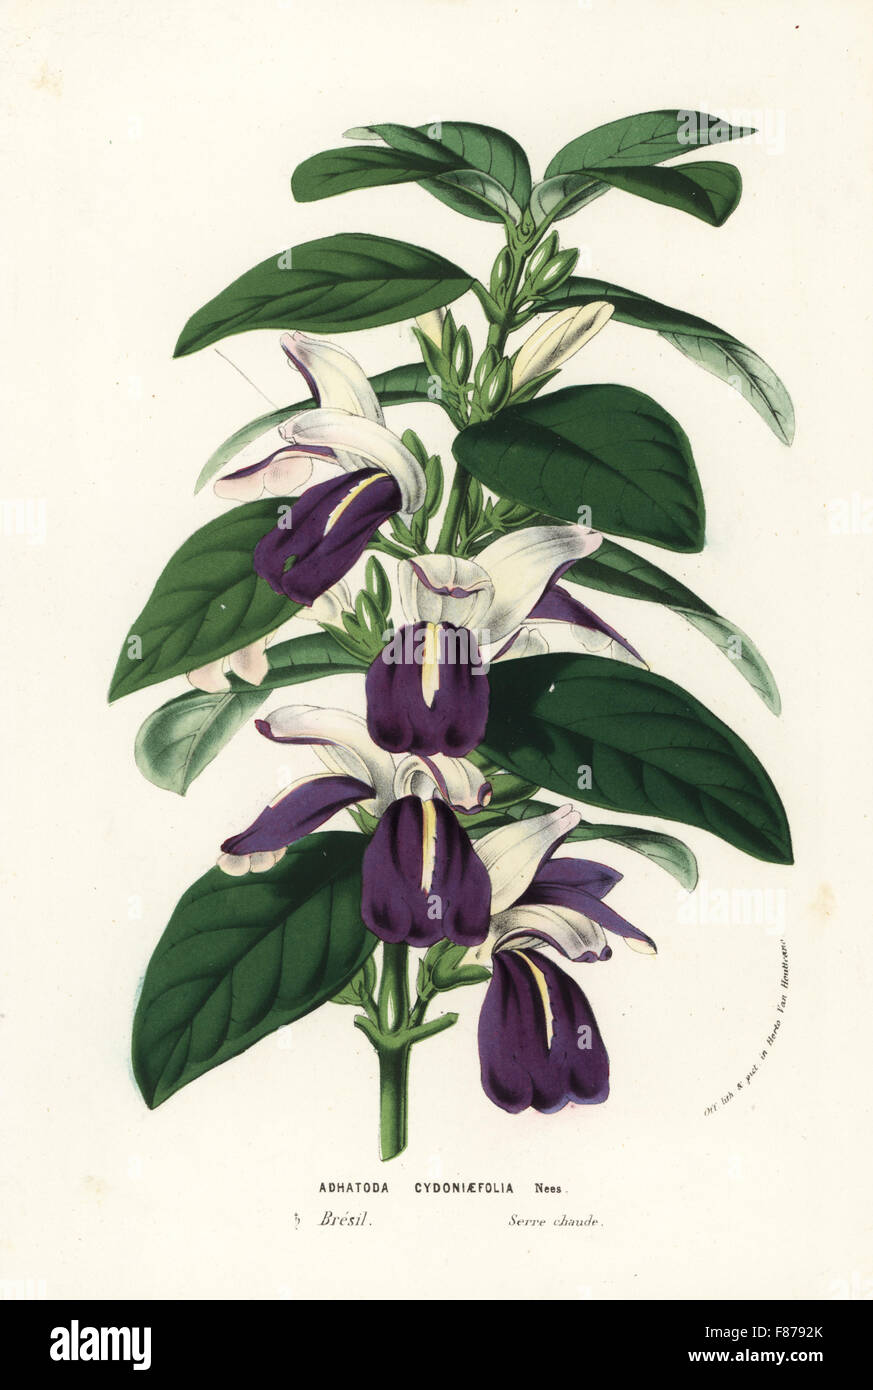 Justicia cydoniifolia (Adhatoda cydoniifolia). Handcoloured lithograph from Louis van Houtte and Charles Lemaire's Flowers of the Gardens and Hothouses of Europe, Flore des Serres et des Jardins de l'Europe, Ghent, Belgium, 1857. Stock Photo